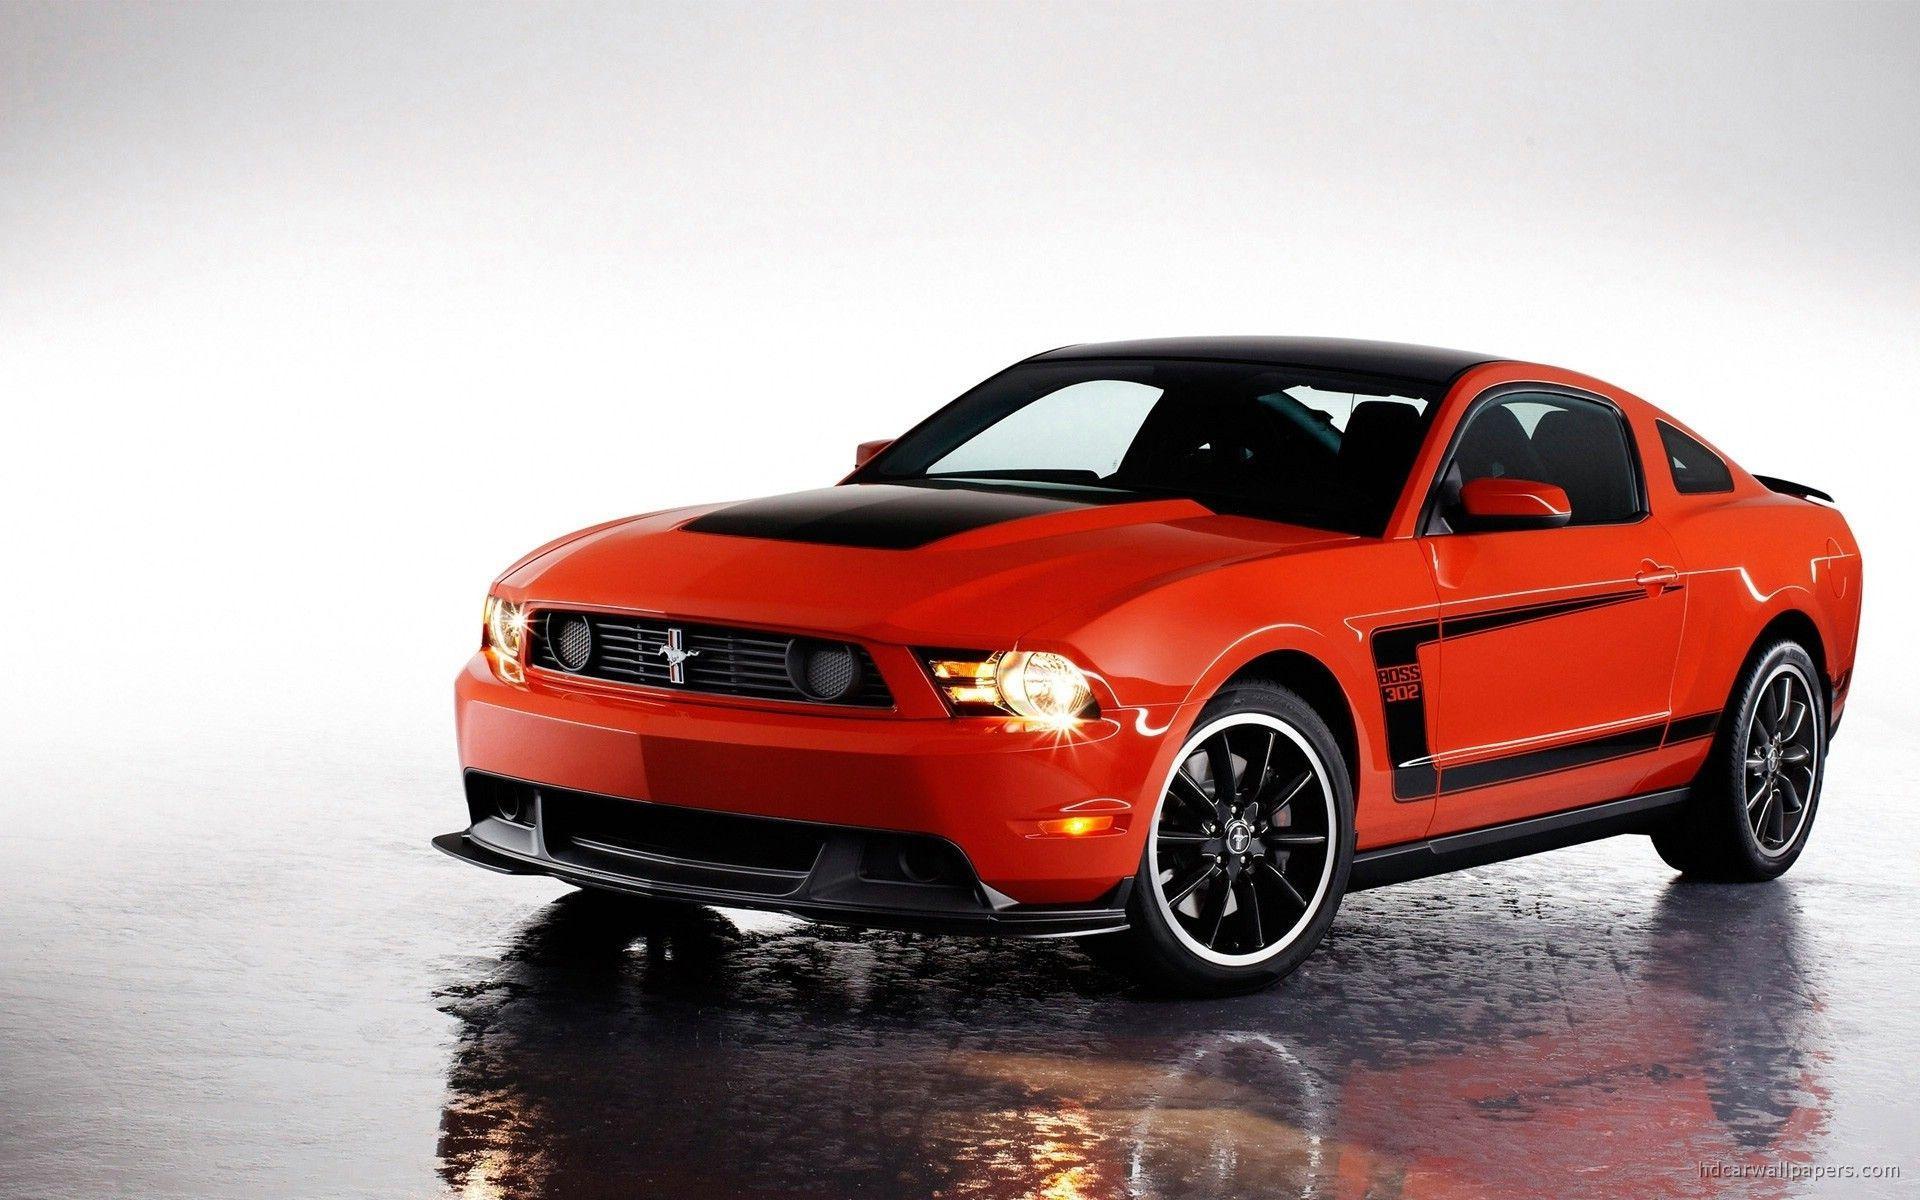 Ford Mustang wallpaper HD quality download